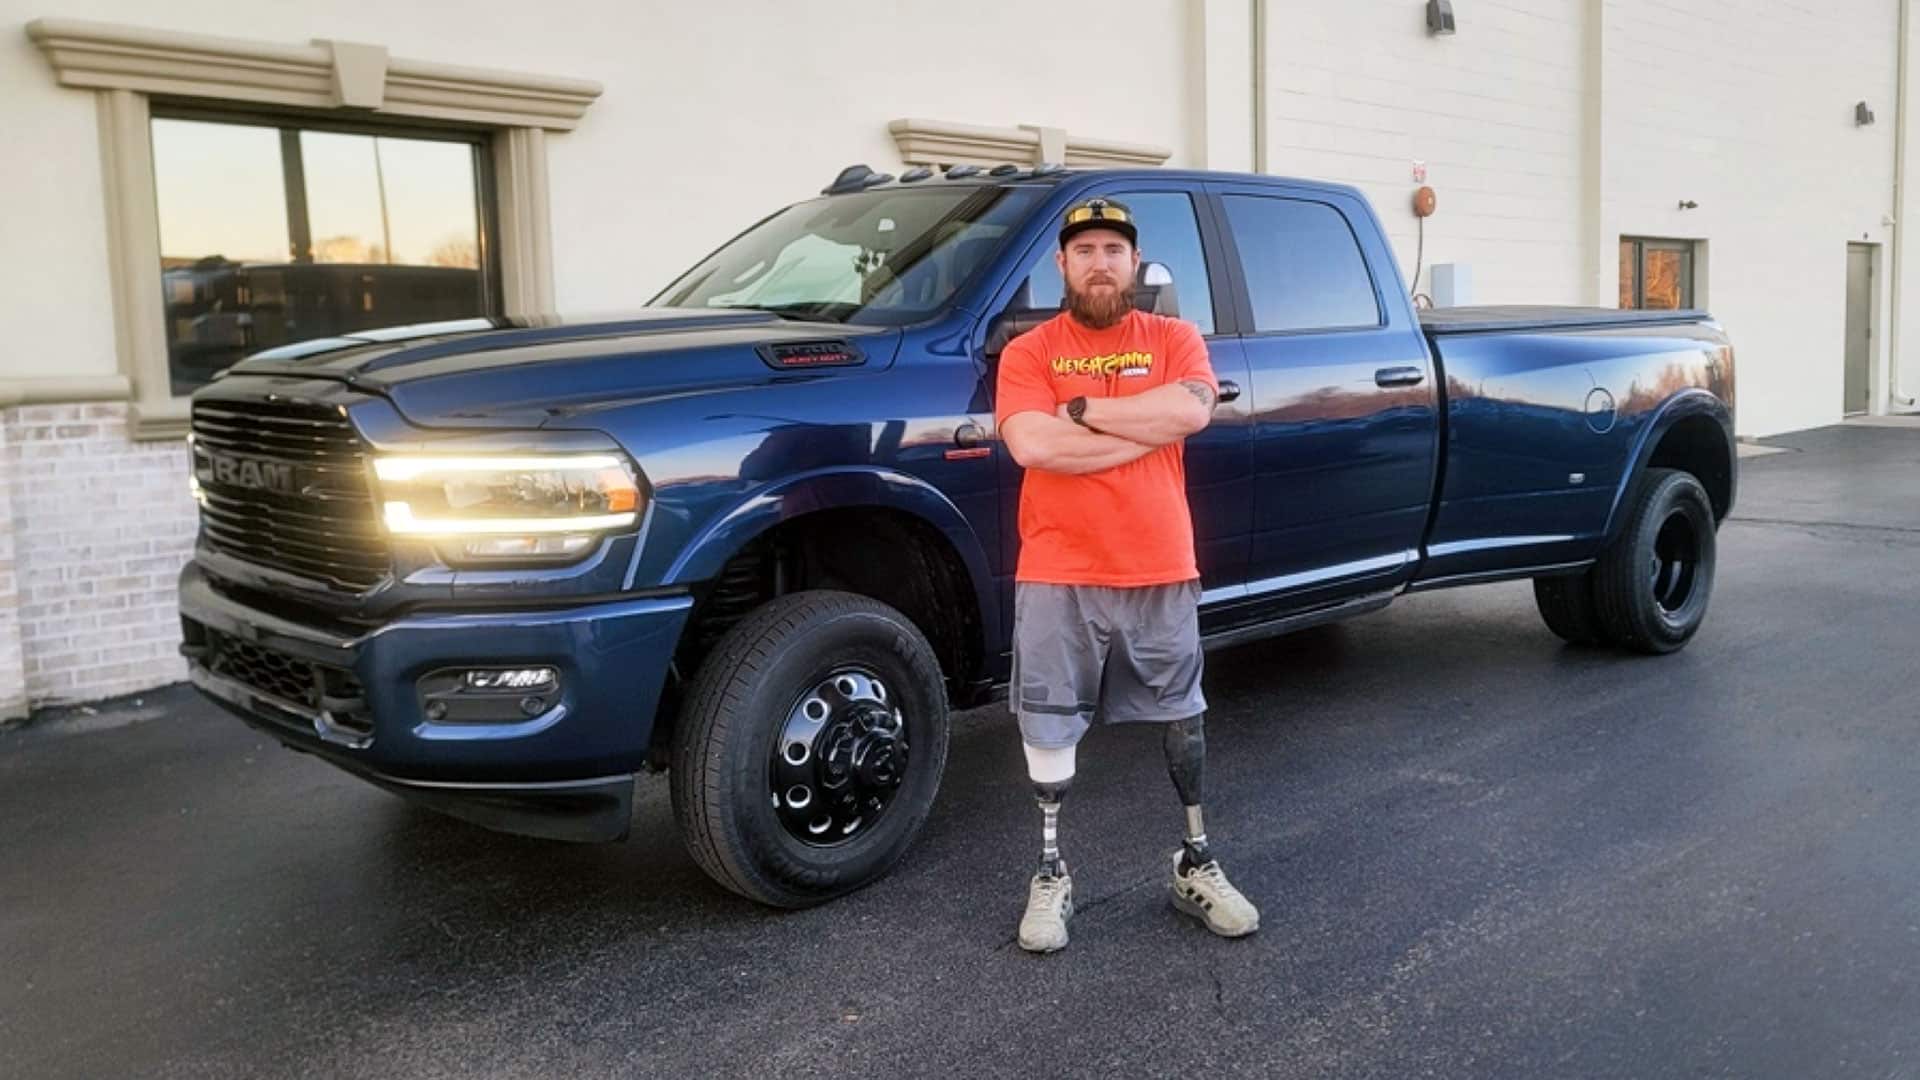 Marine Corporal Larry Draughn awarded vehicle grant